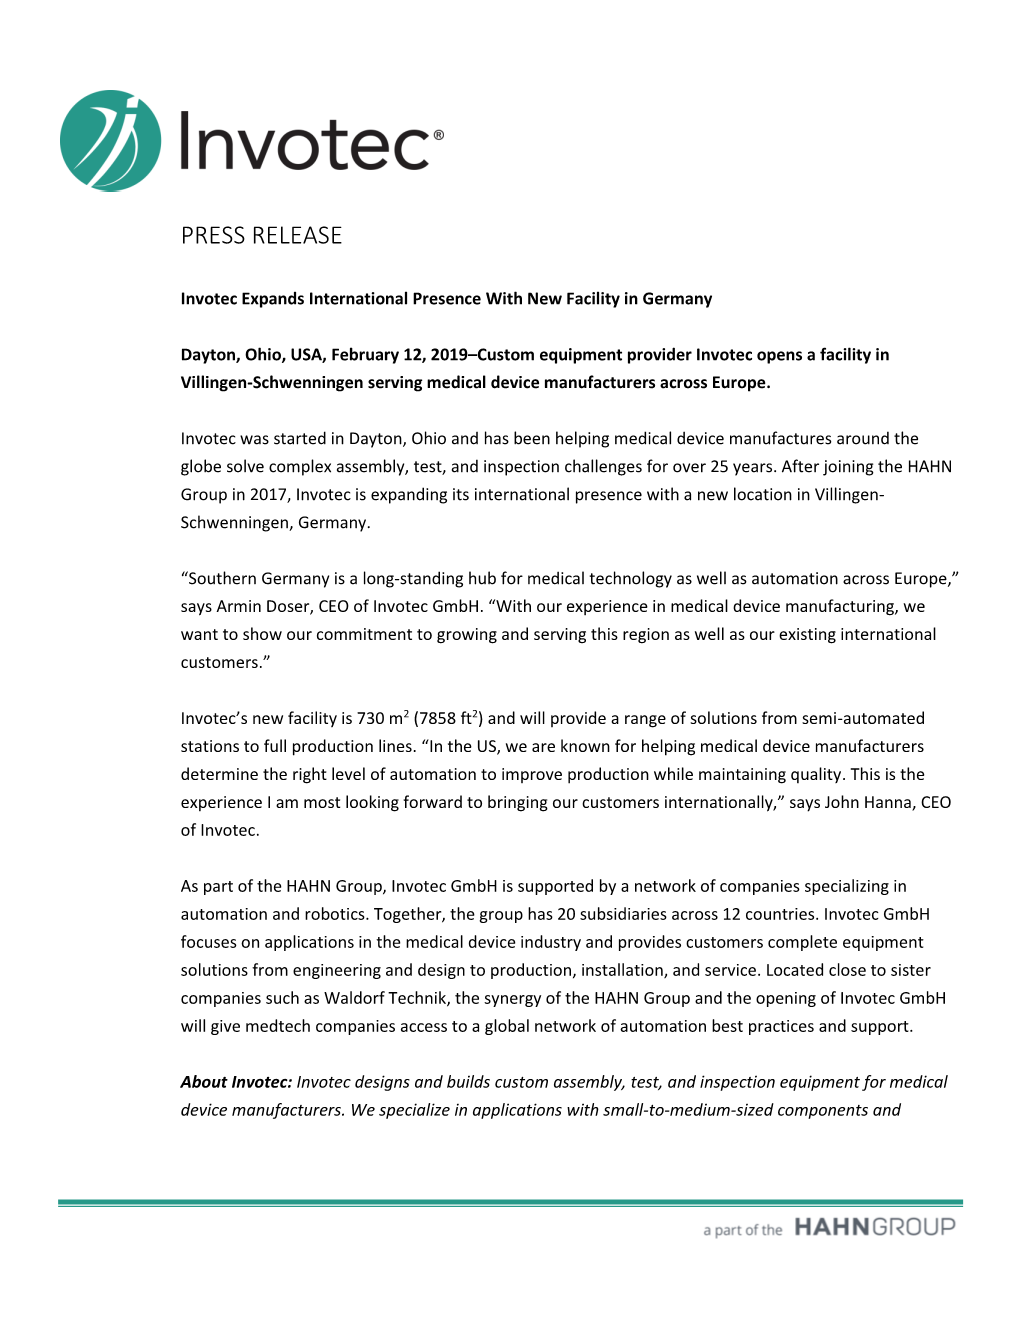 Invotec Expands International Presence with New Facility in Germany